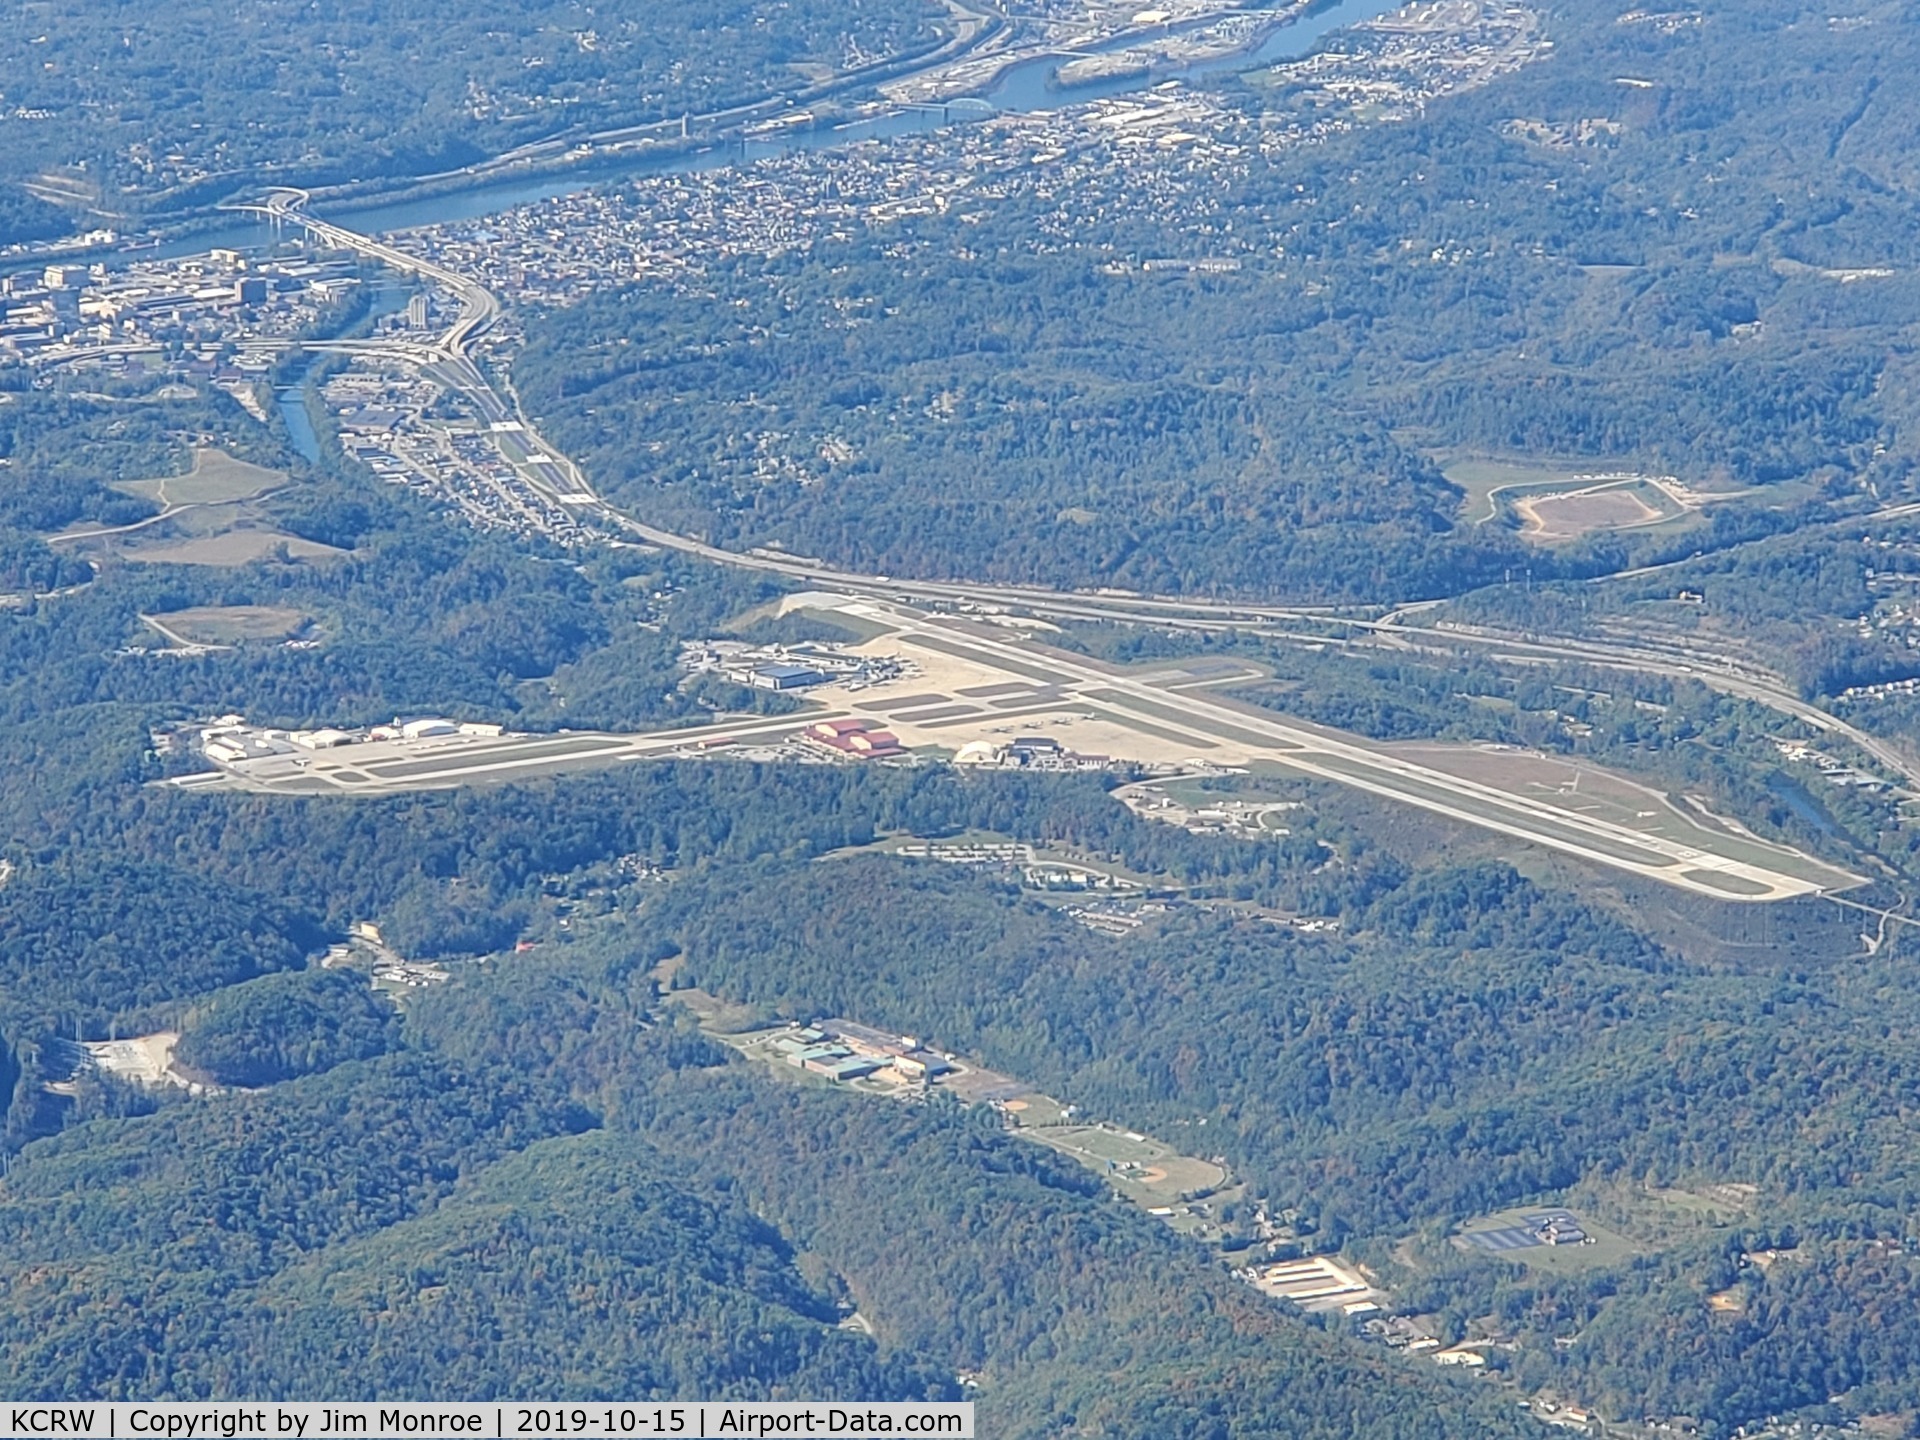 Yeager Airport (CRW) - From 8,000 feet MSL on a trip to Ann Arbor, Michigan